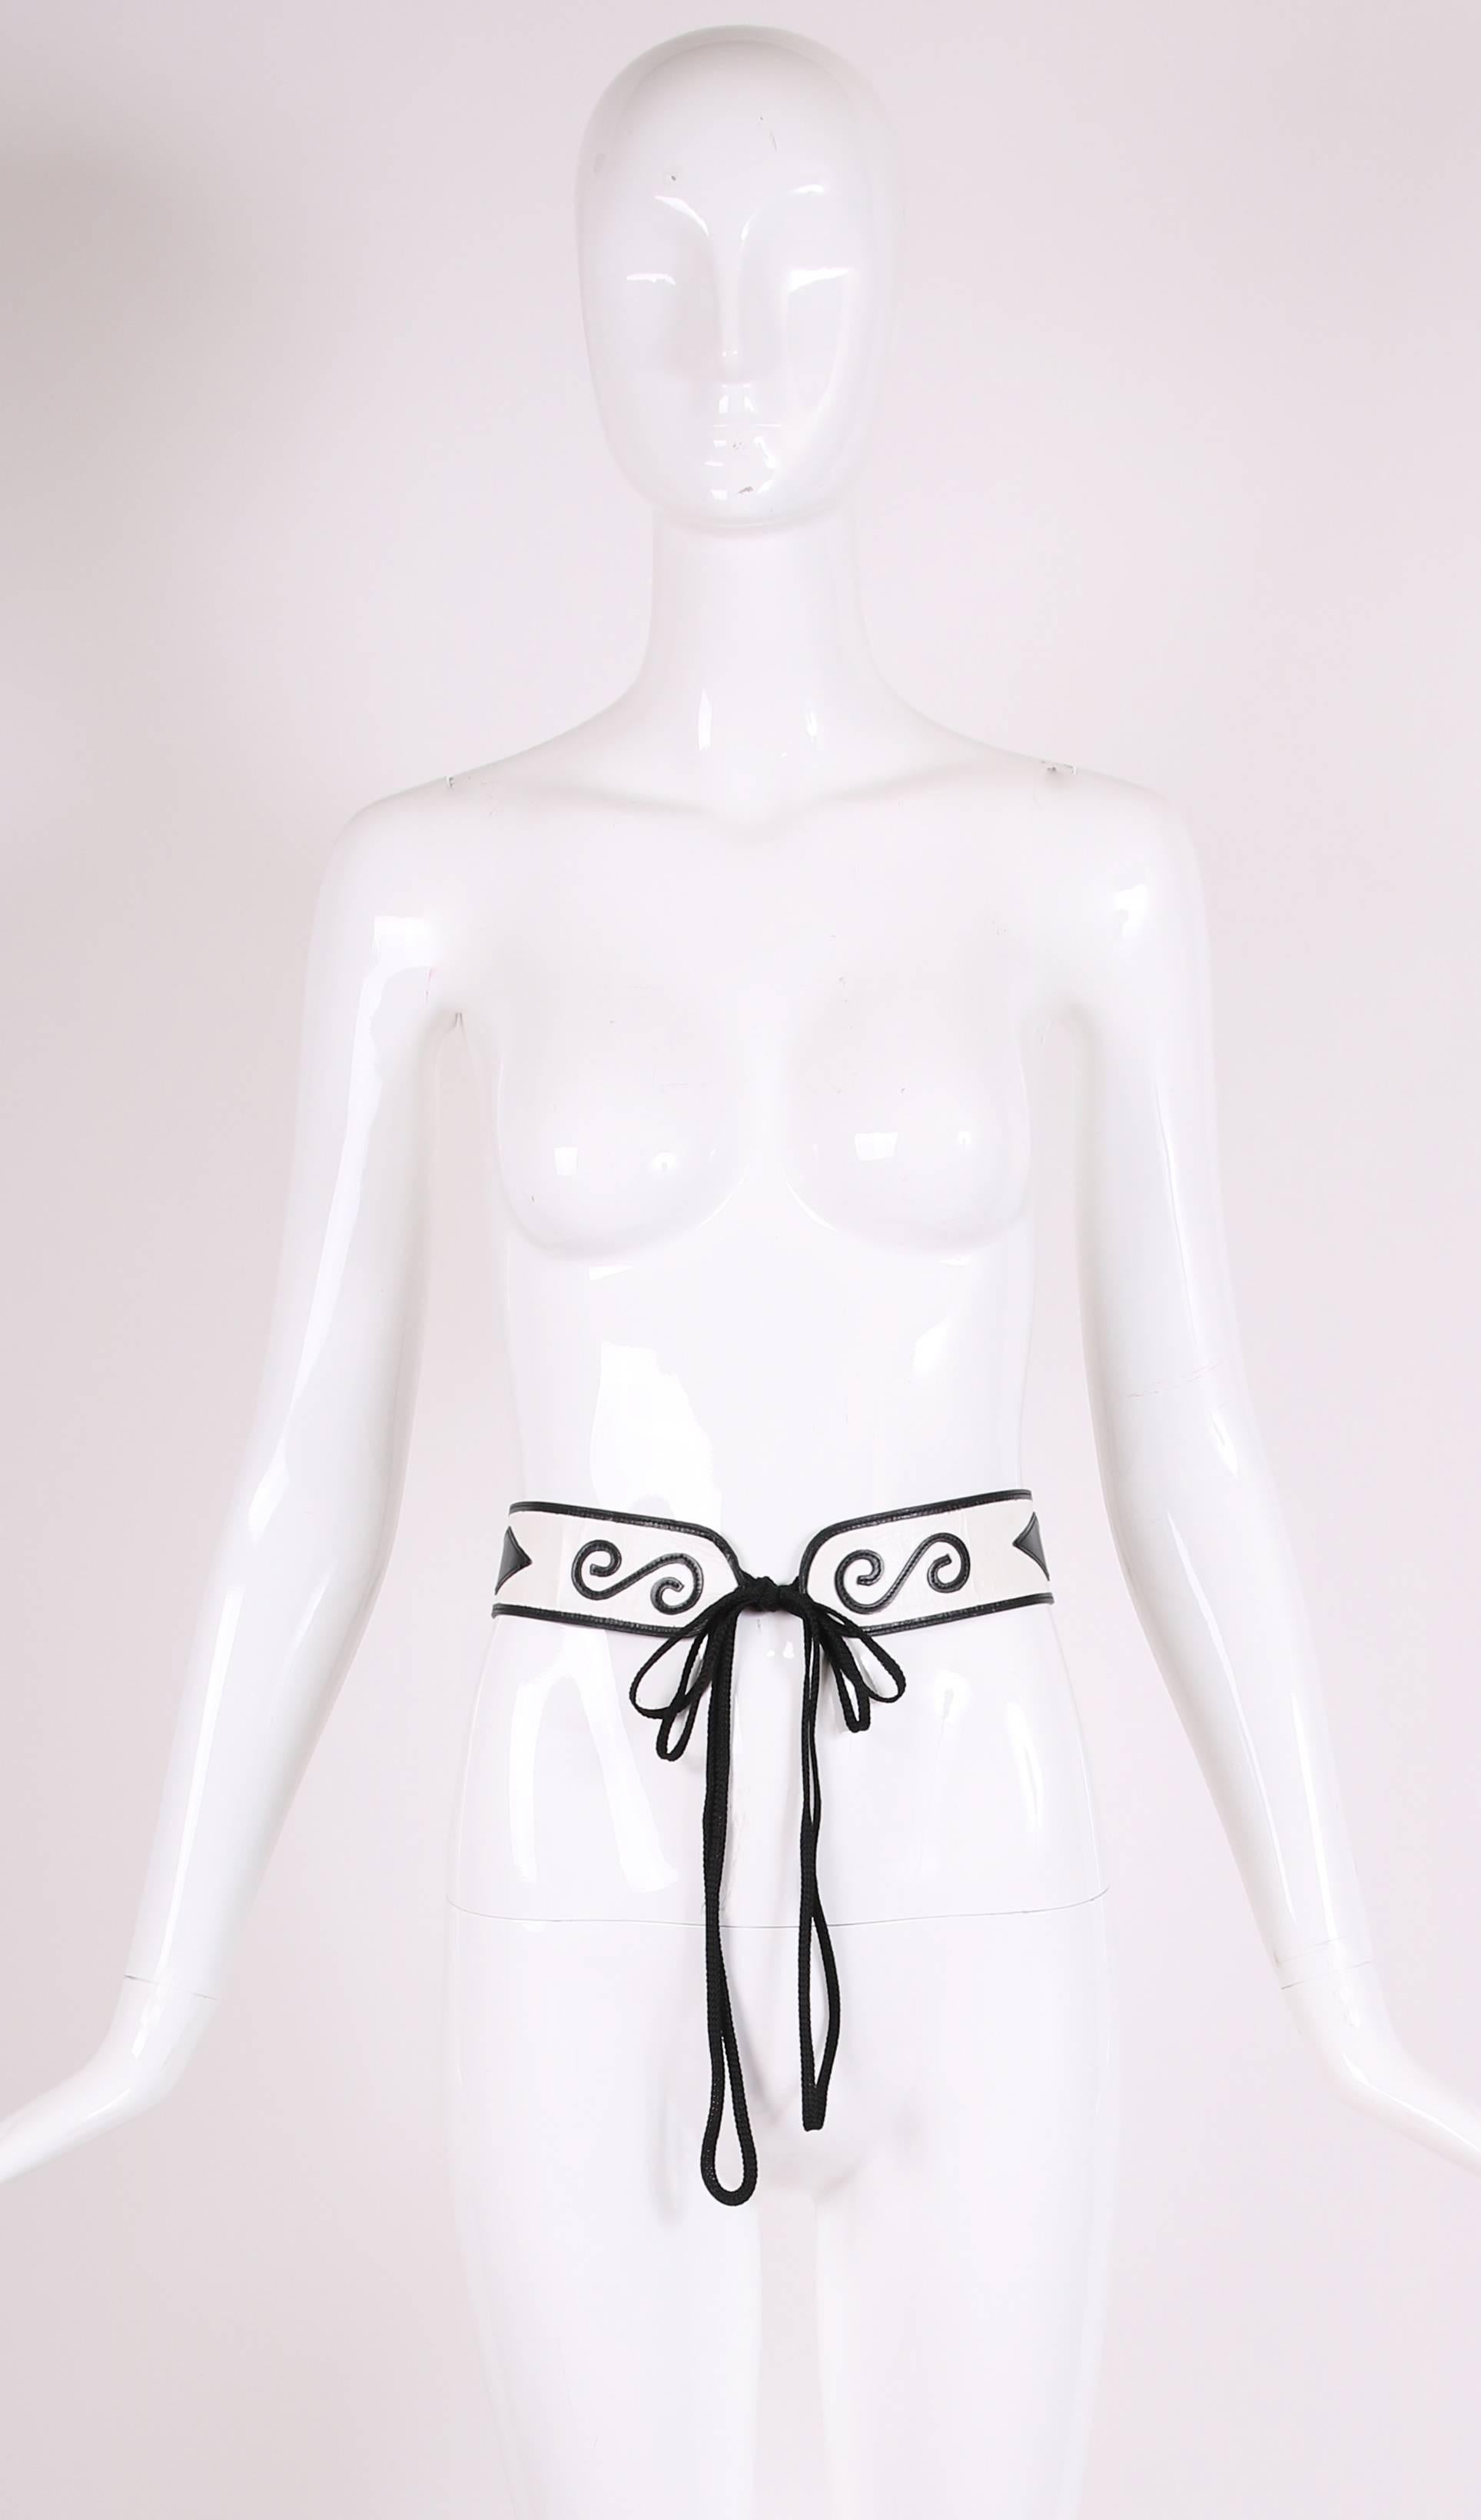 1970's Yves Saint Laurent haute couture white leather belt with black leather design. Belt attaches at either end to a double cord closure.
MEASUREMENTS:
Length (of only the leather part) - 25"
Width (of leather part) - 2"
Length of belt